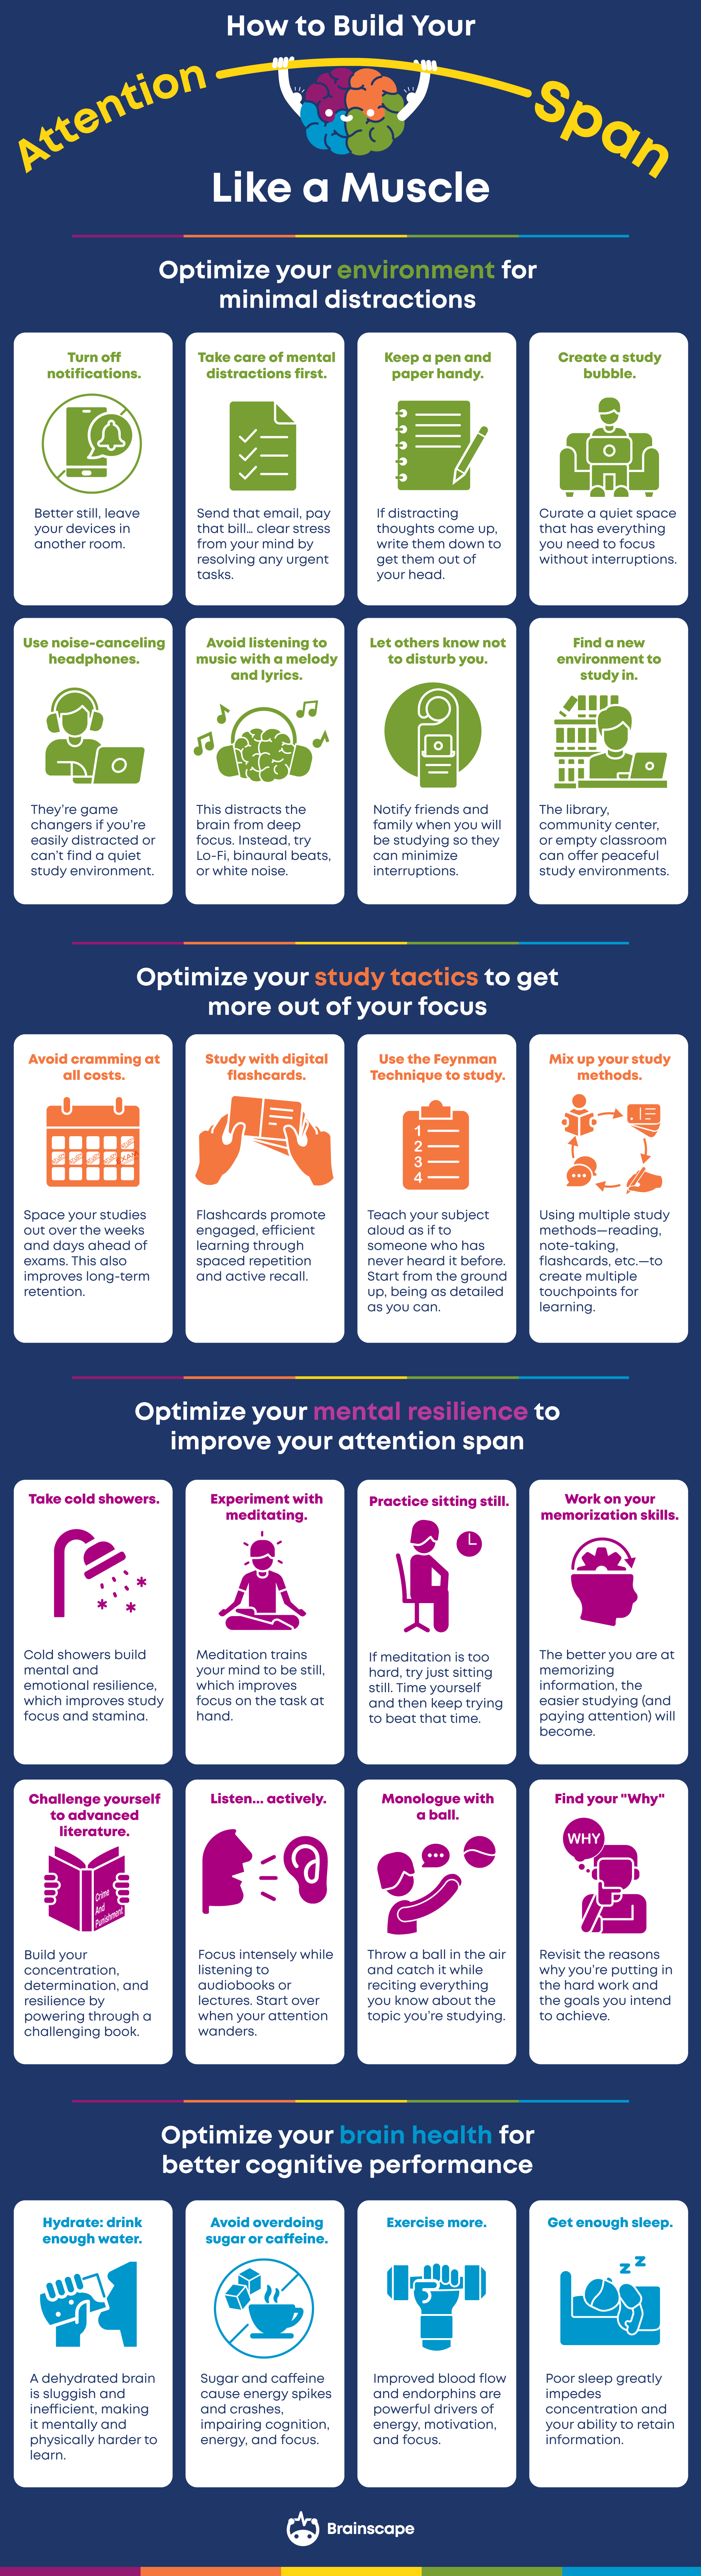 Infographic on how to build your attention span like a muscle